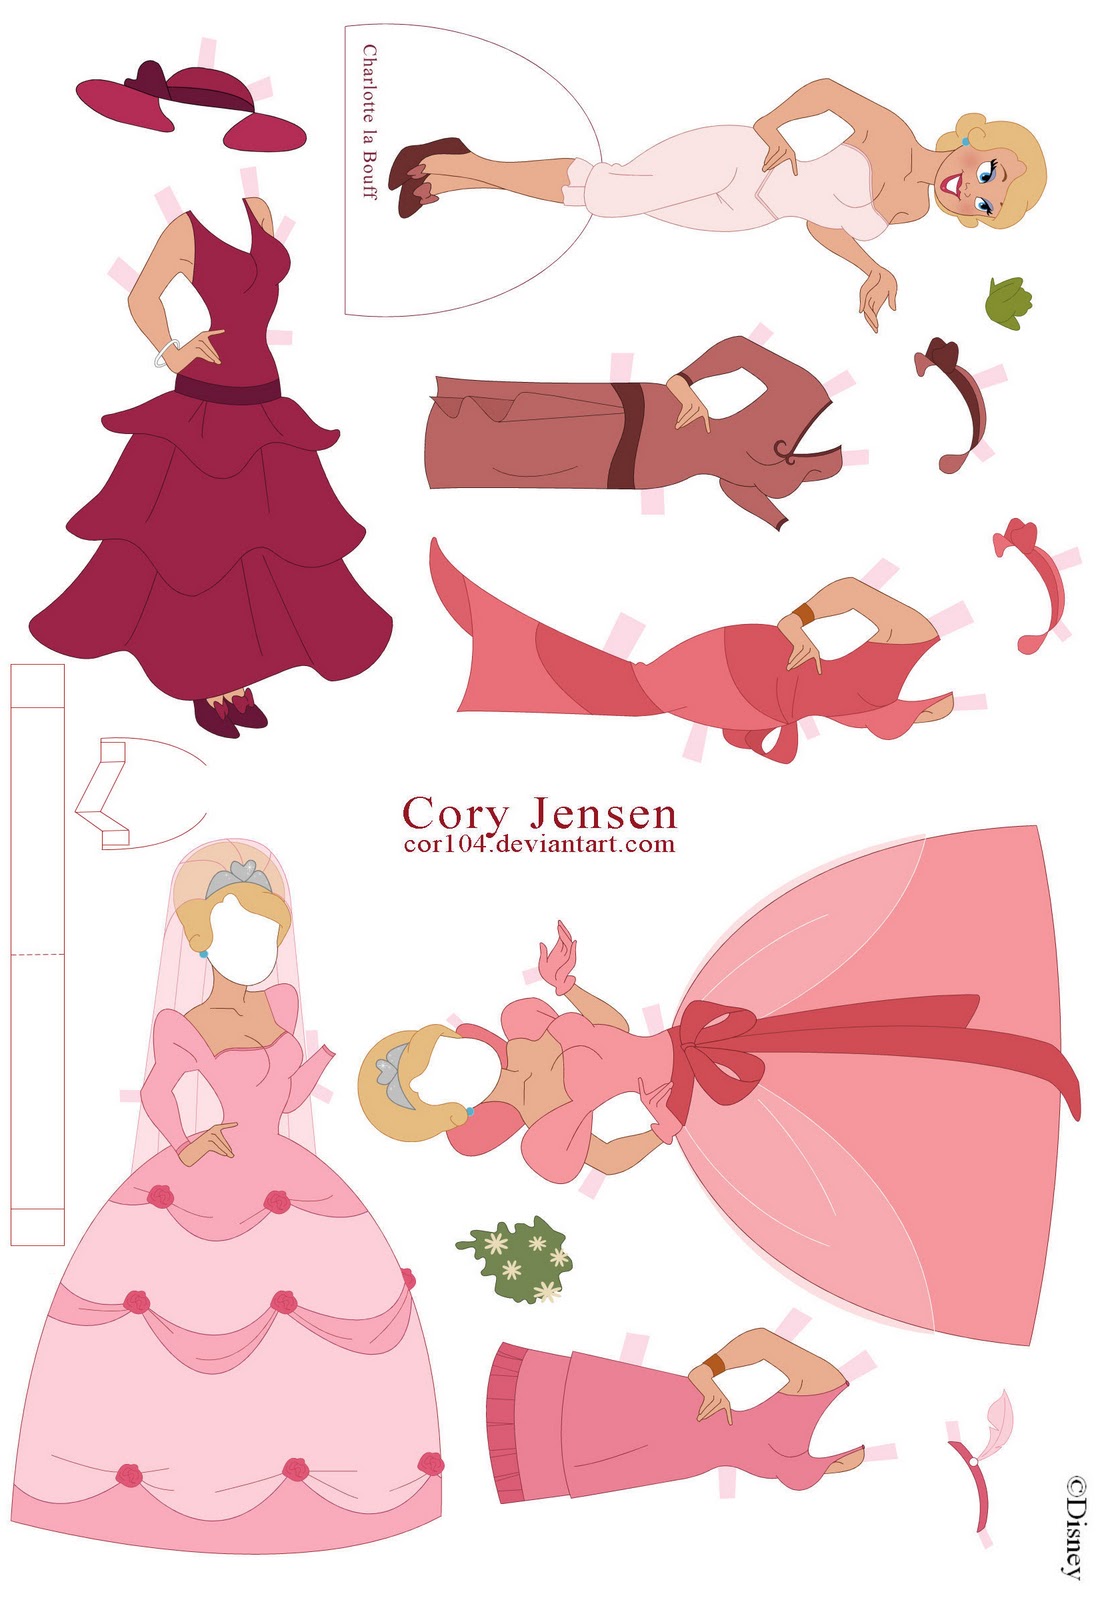 Jensen a very talented artist who publishes these paper dolls on Deviant Art you will see his name and the link to his page on the paper doll image